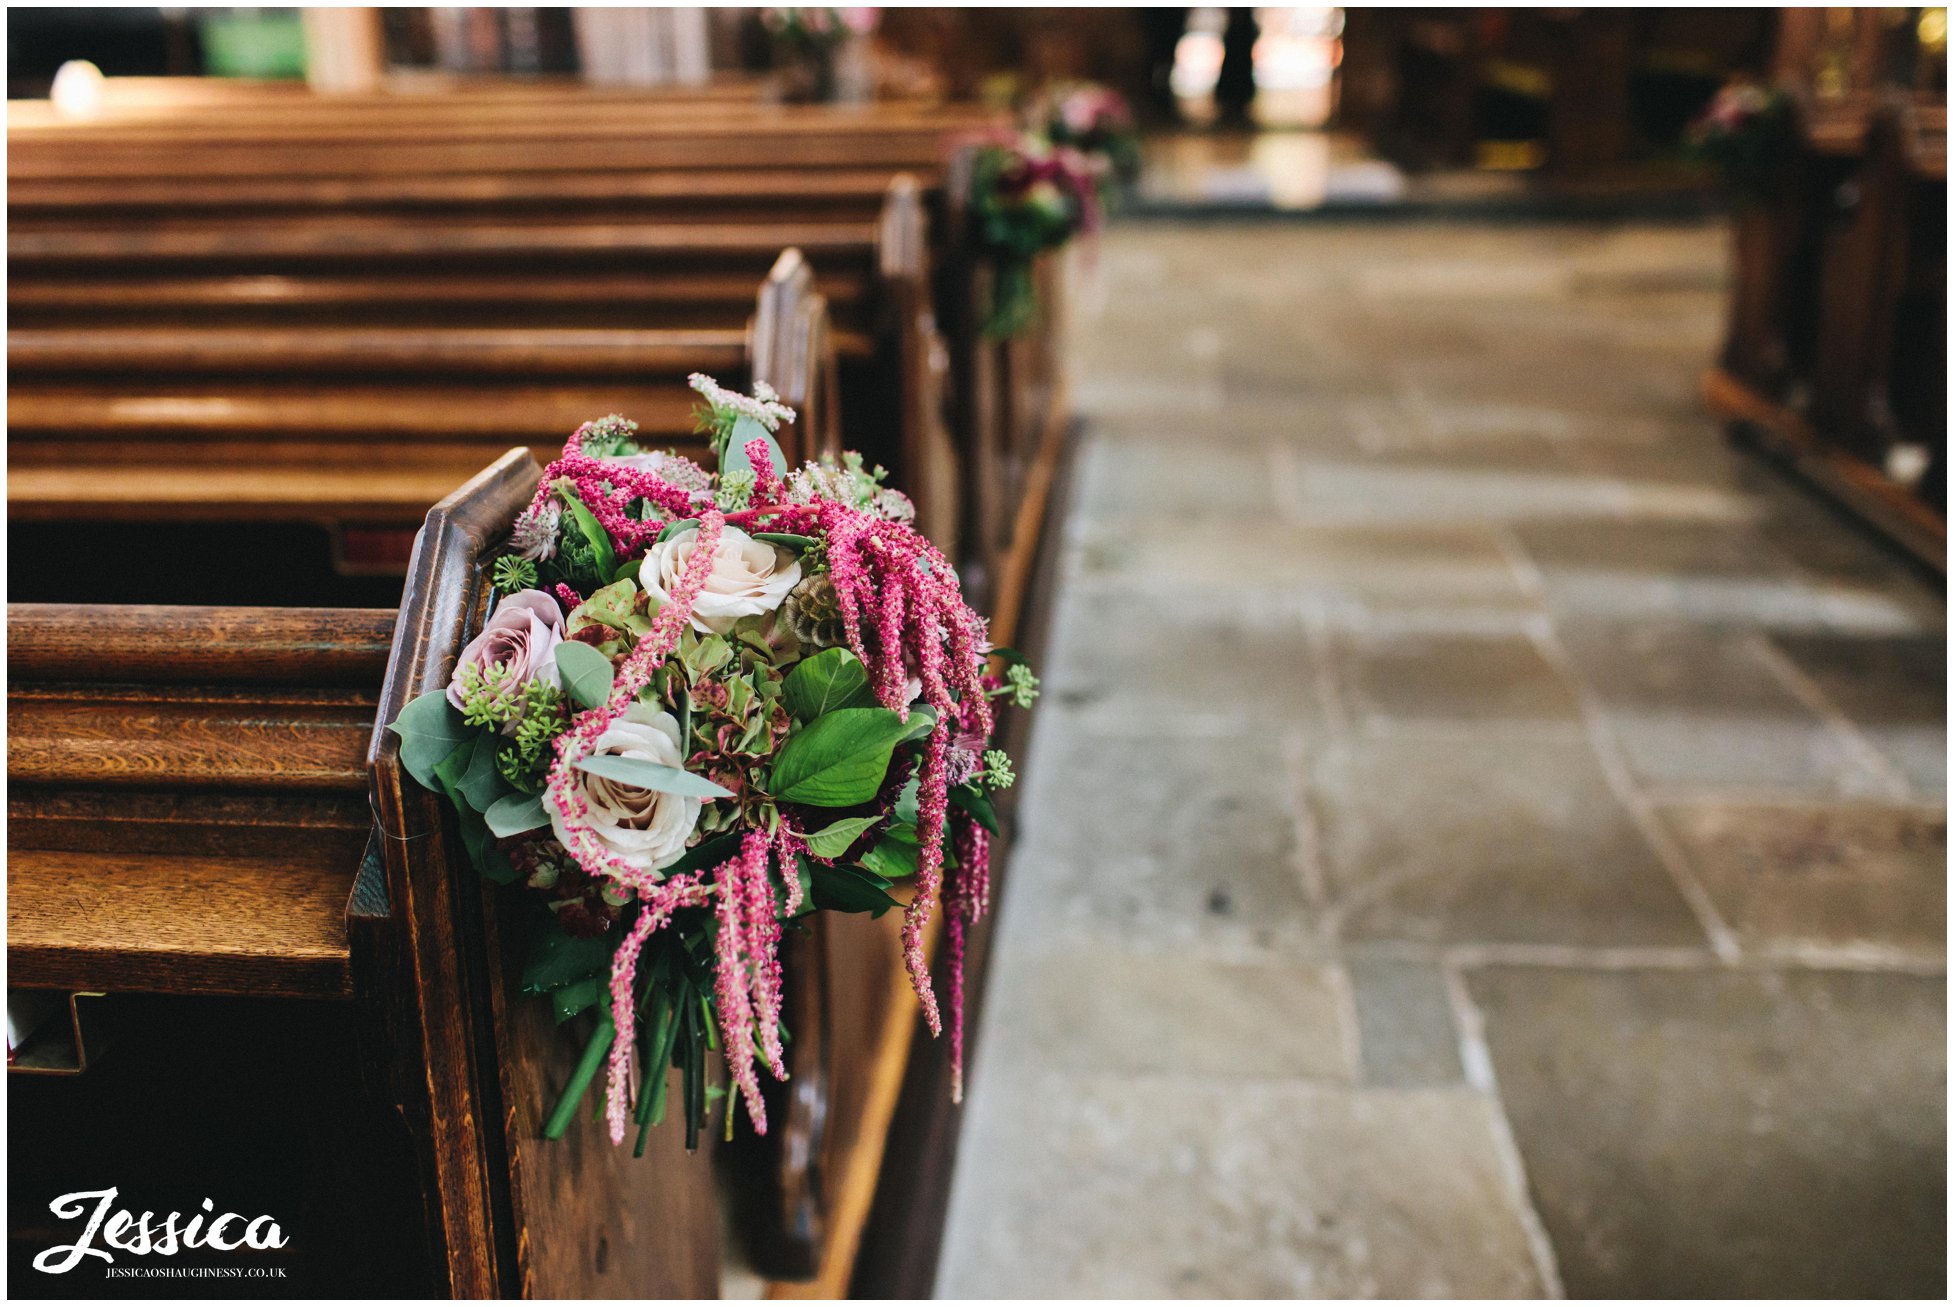 Floral bouquets decorate the church